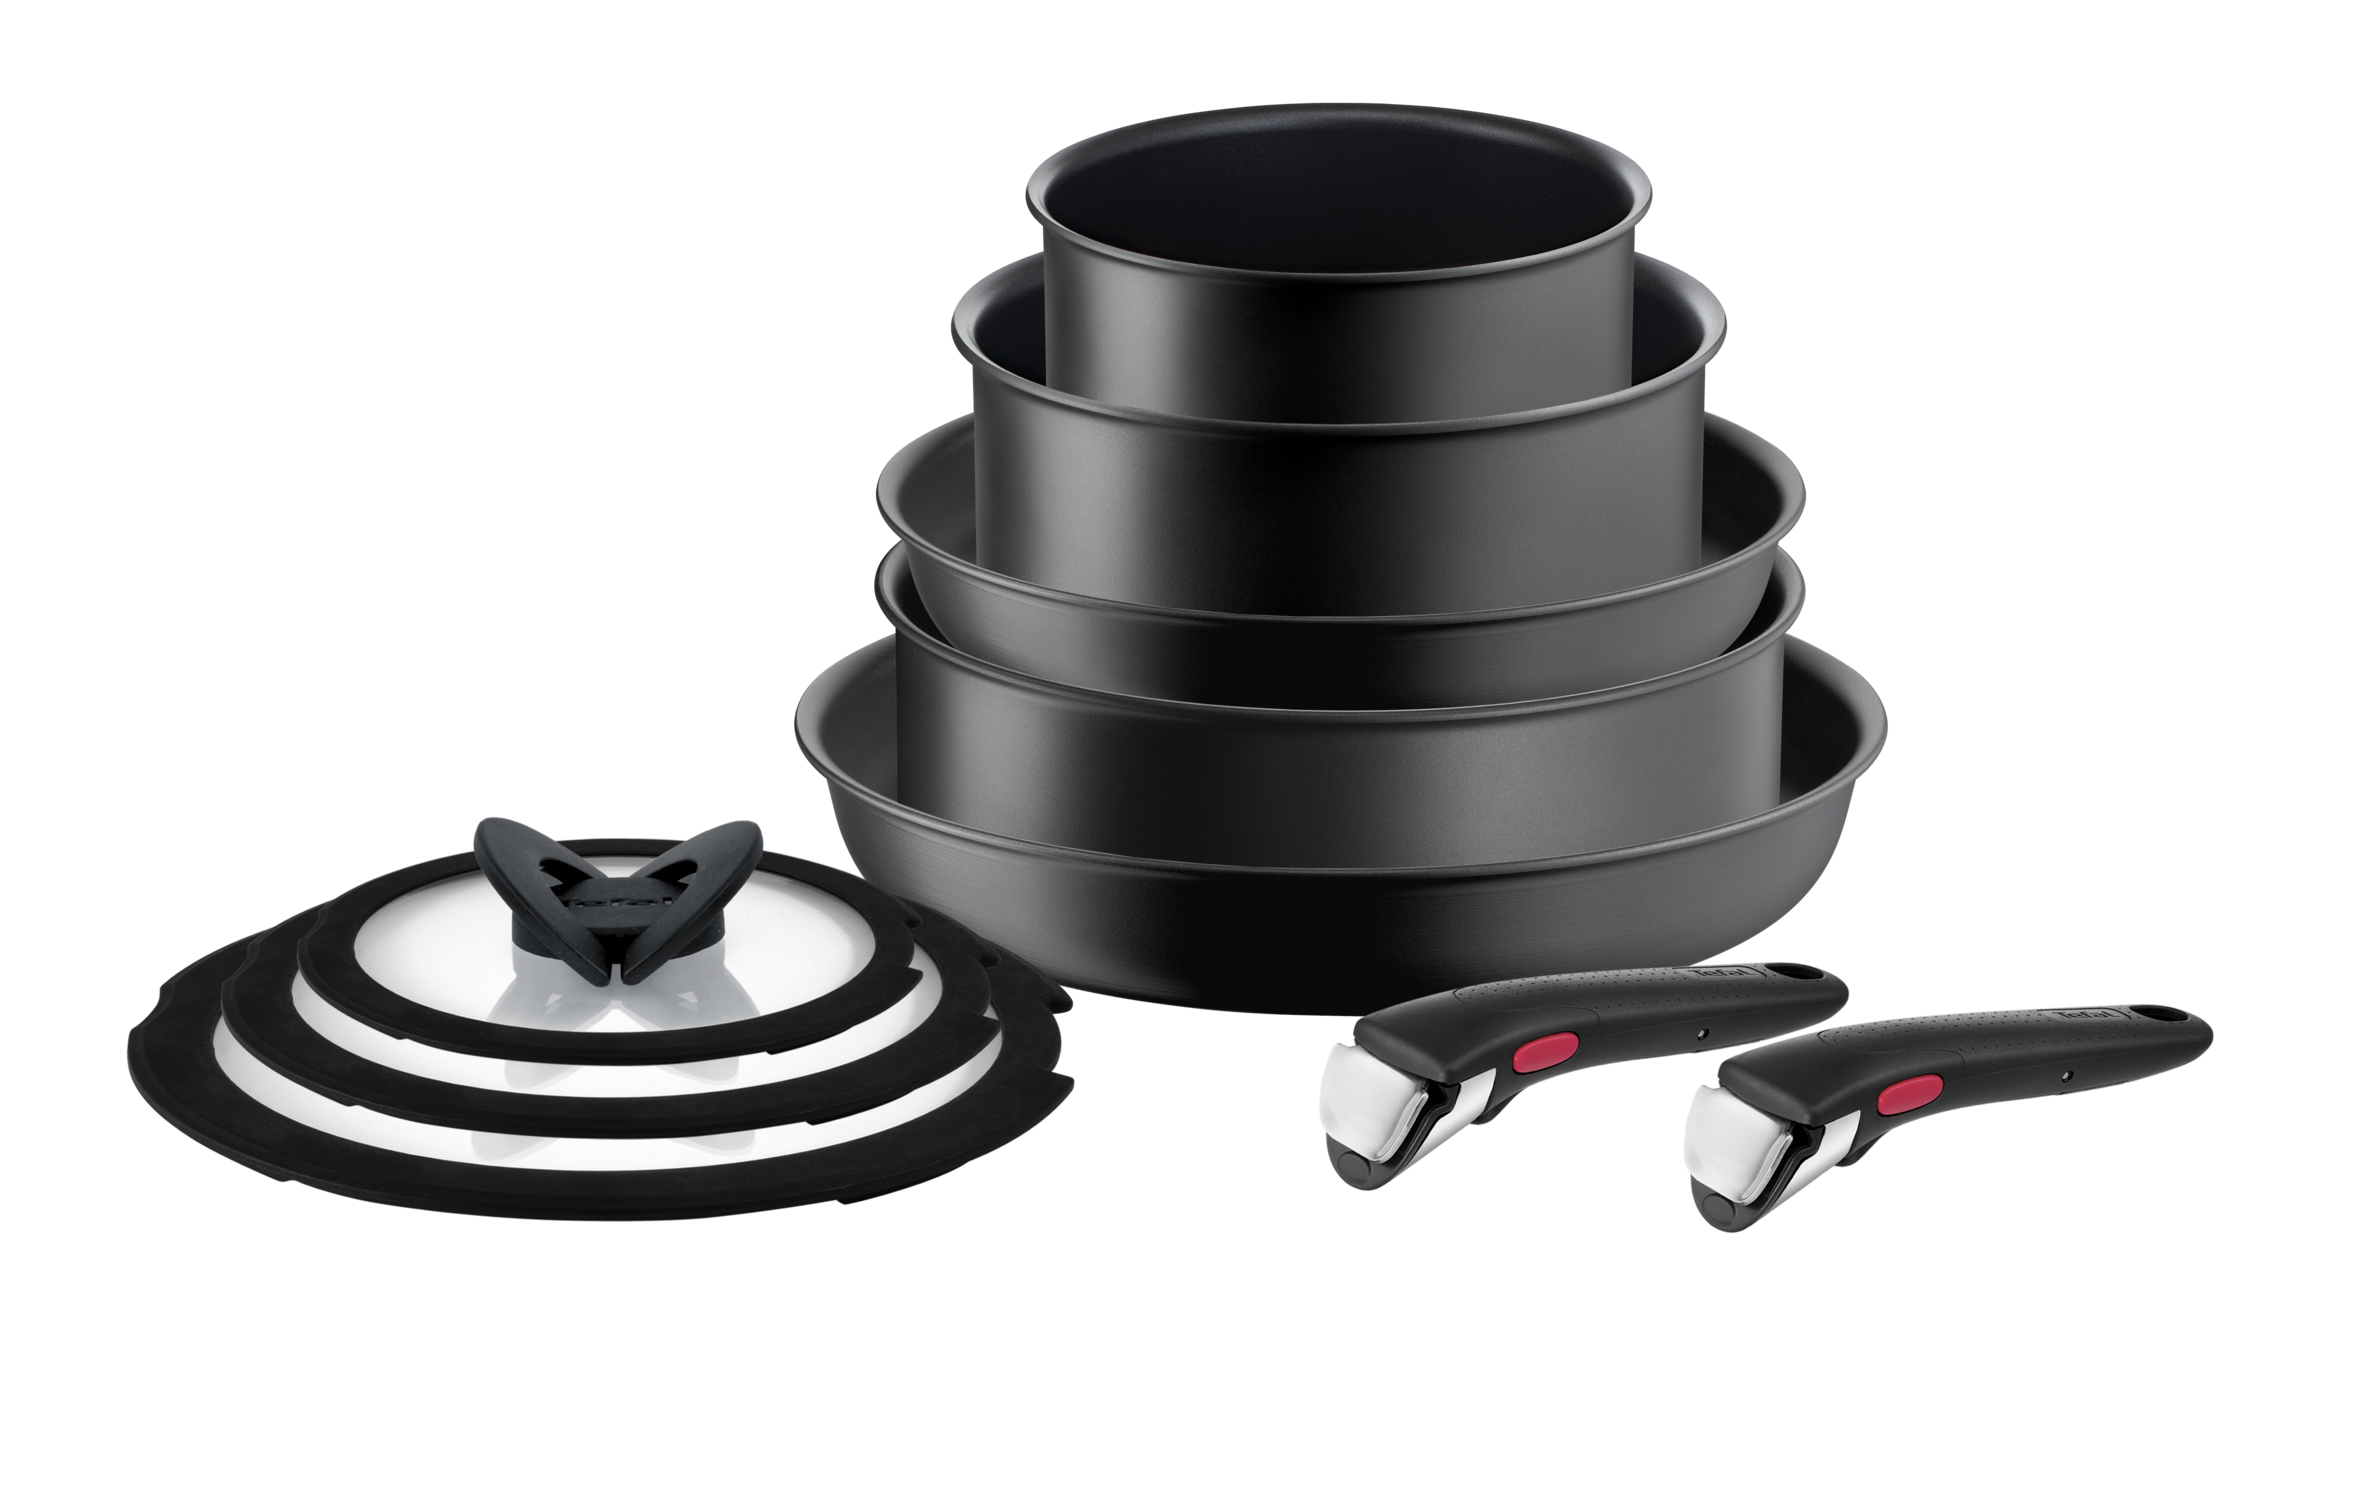 Tefal Ingenio Ultimate Non-Stick Induction 12pc Set